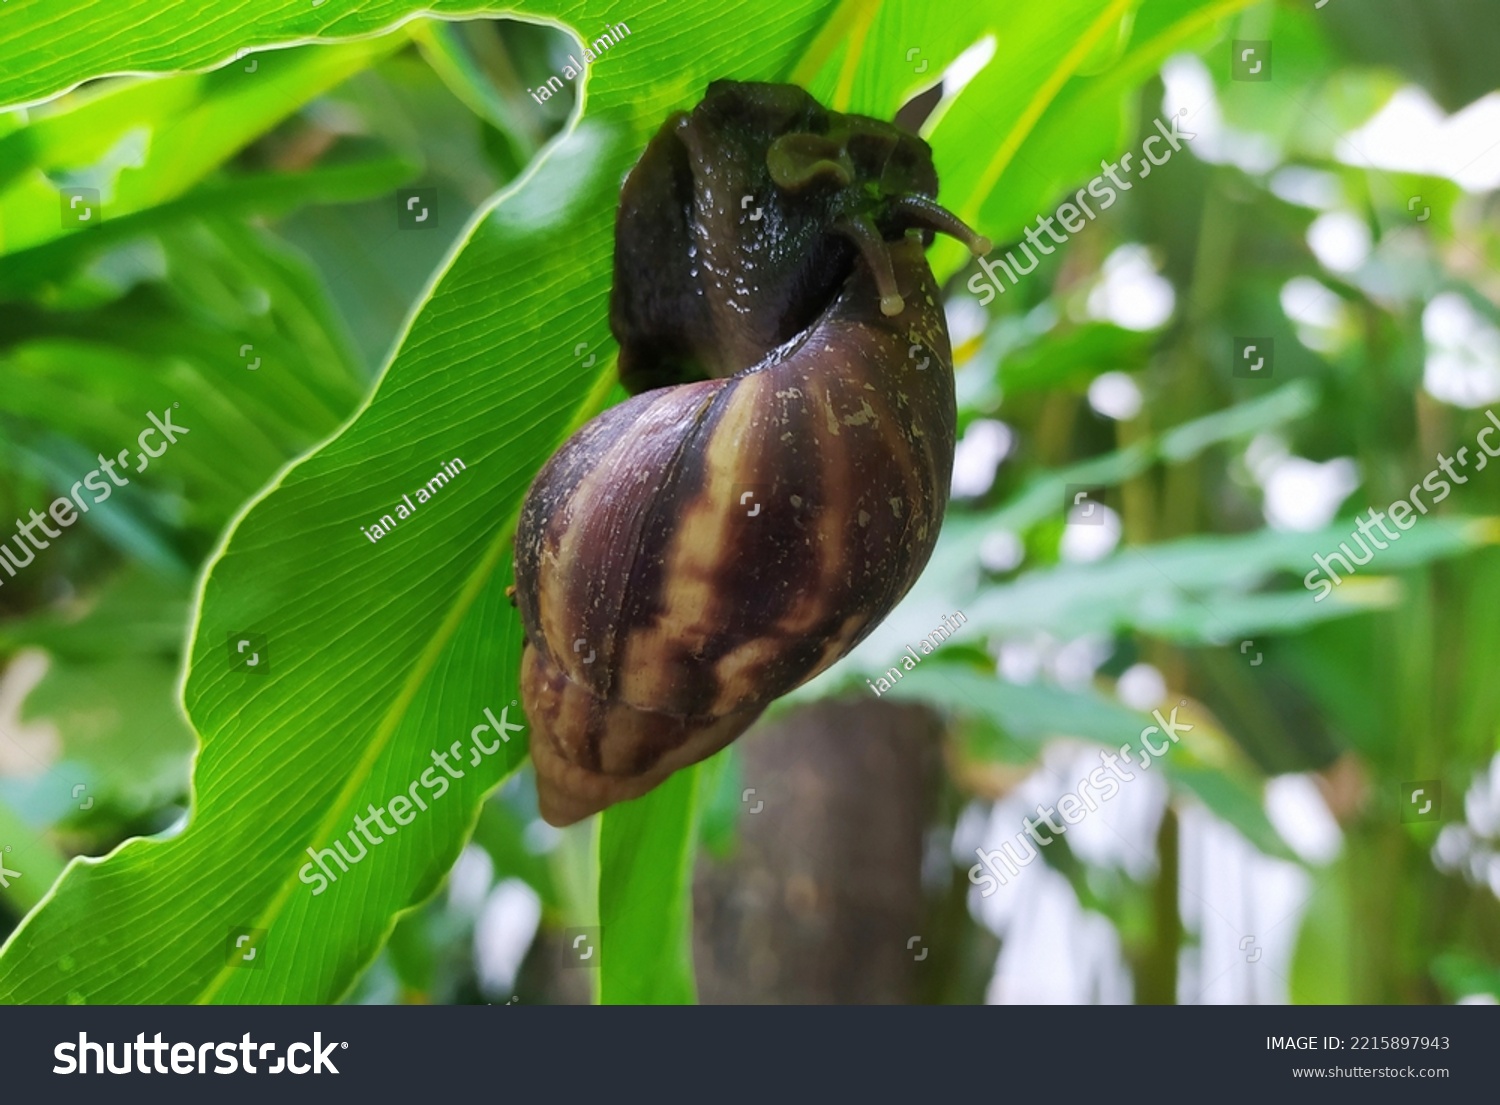 Copse snail gliding on the plant in the garden. Macro, close-up. Copse snail (Arianta arbustorum) is a medium-sized species of land snail. Copse snail is a common pest in agriculture and horticulture. #2215897943